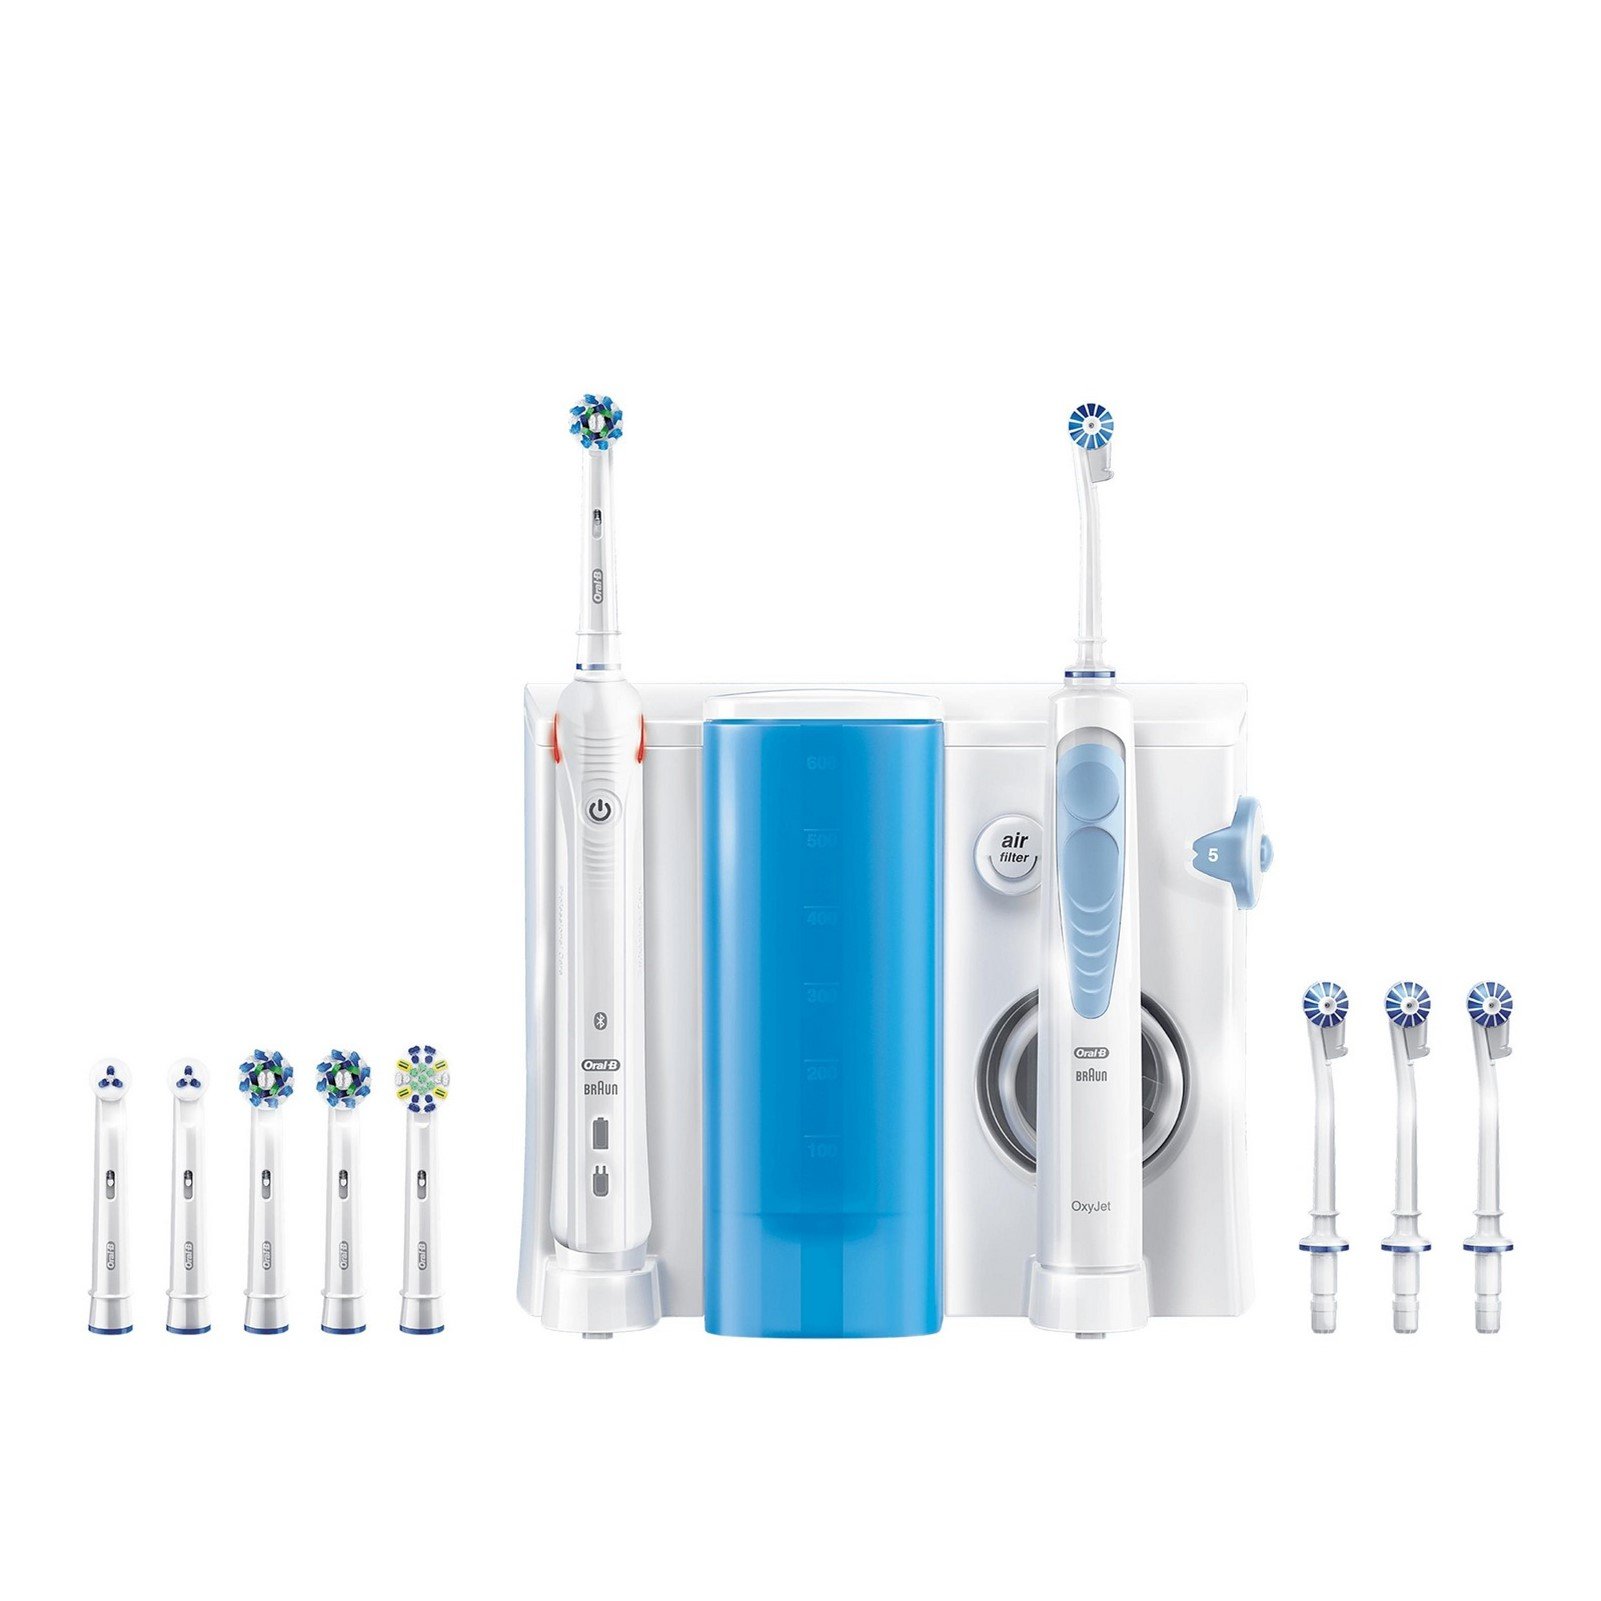 Spotlijster Droogte Actief Buy Oral-B Oxyjet Cleaning System + Smart 5000 Electric Toothbrush · USA